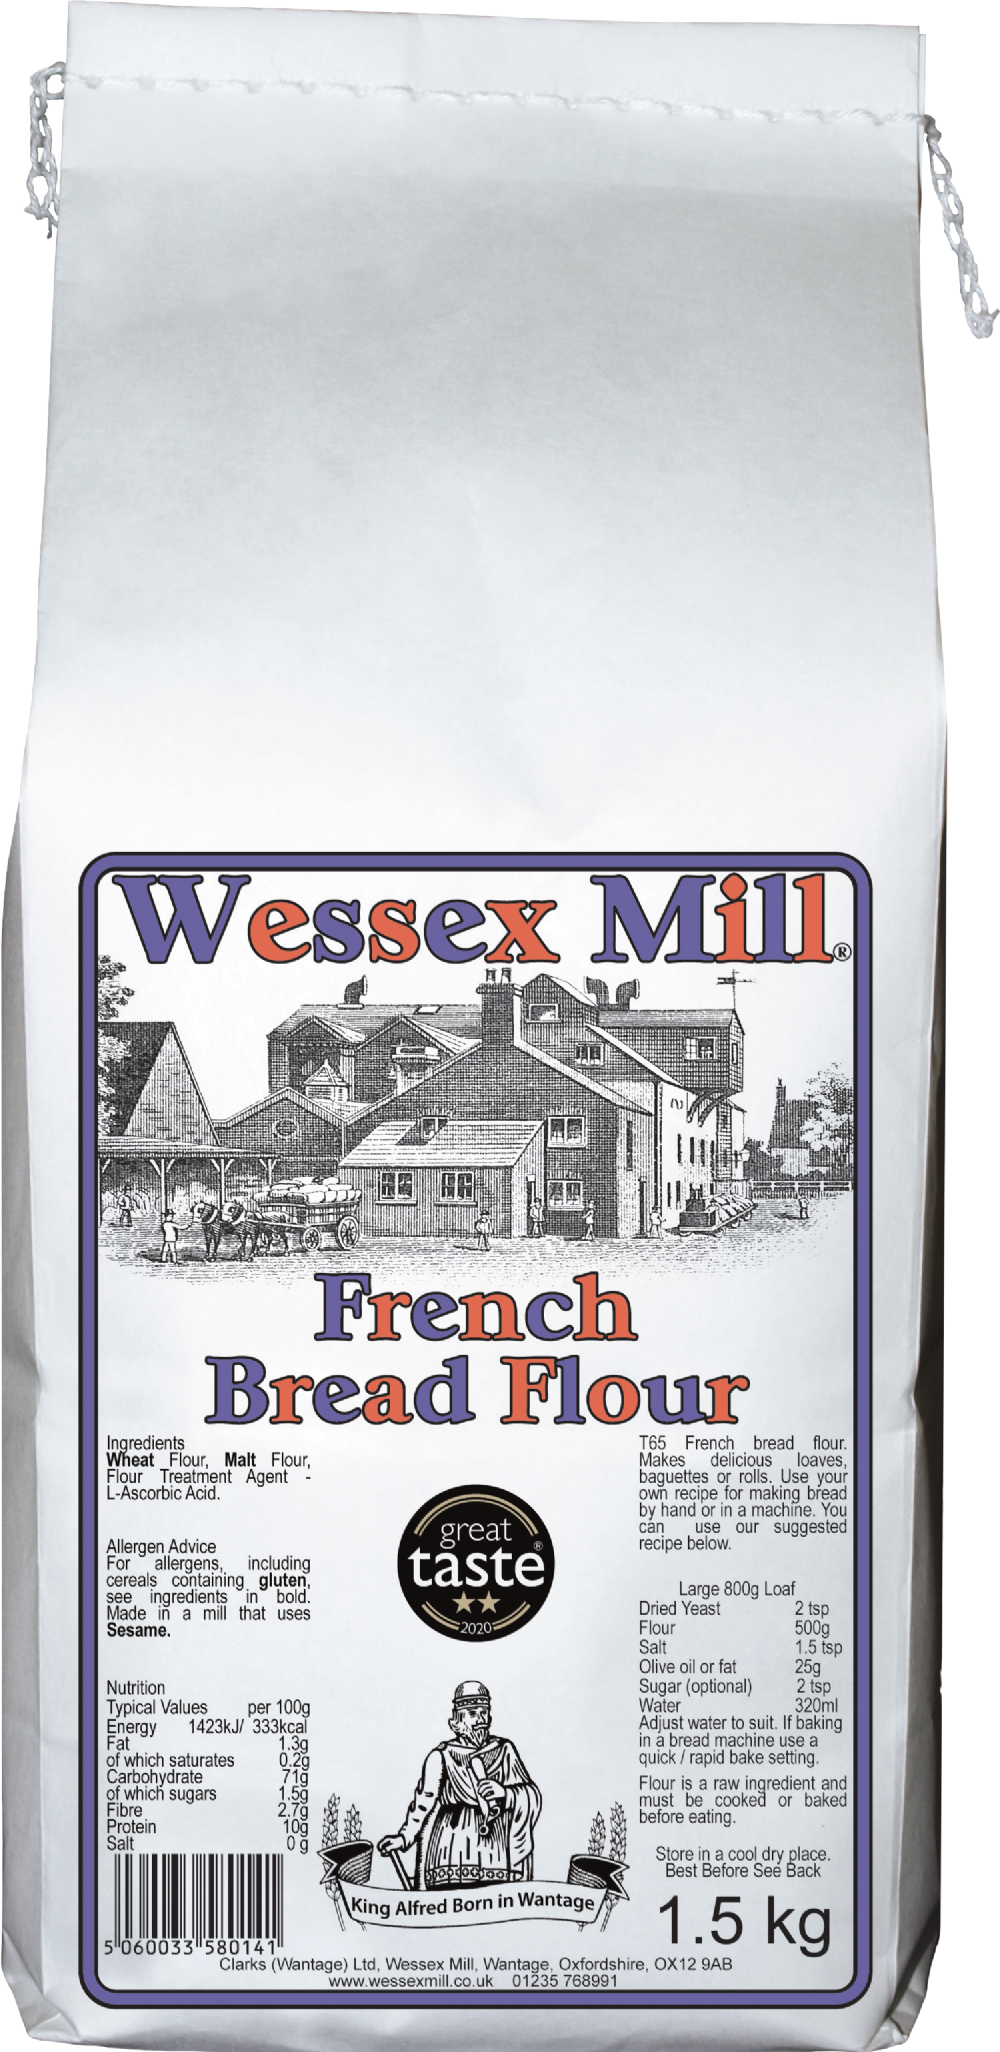 WESSEX MILL French Bread Flour 1.5kg